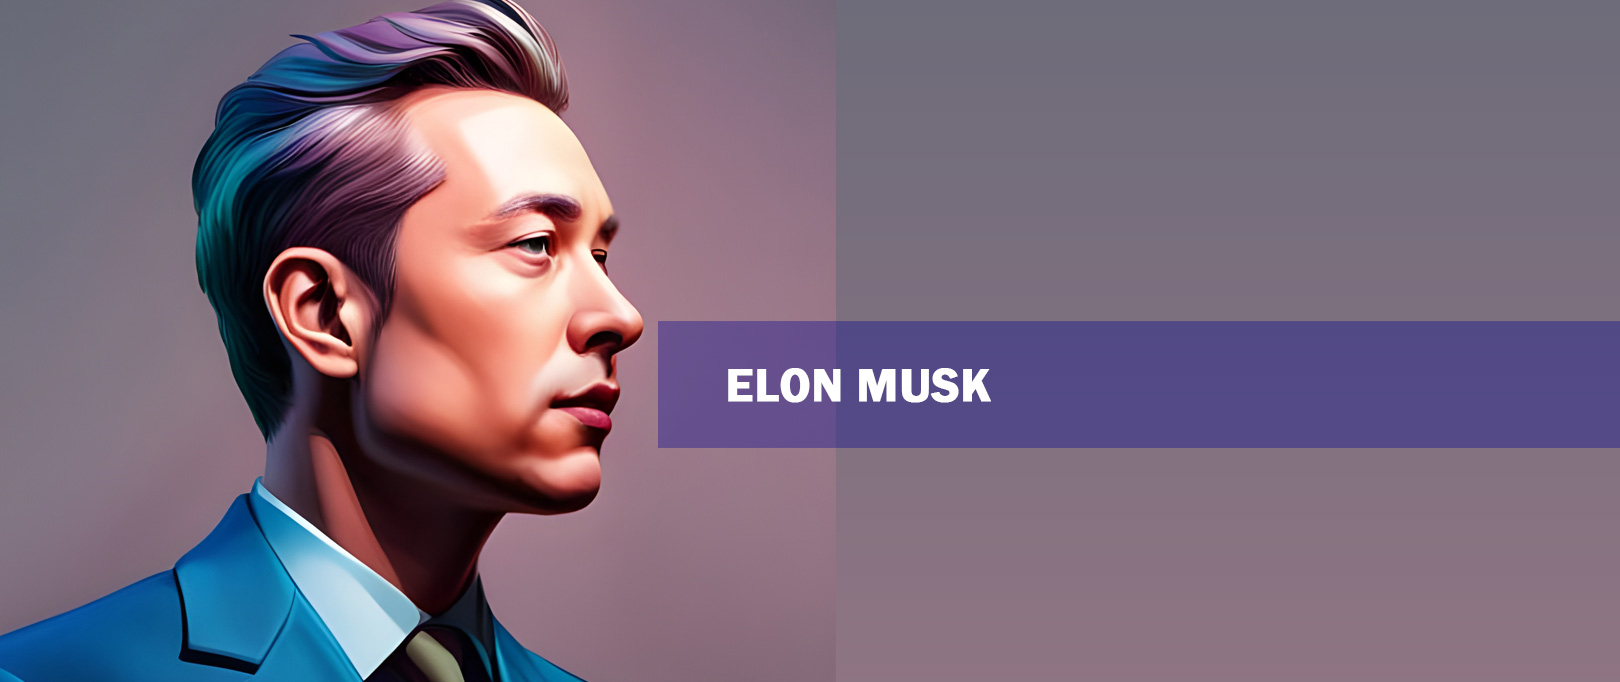 Elon Musk with Strong Cryptocurrency Portfolio as a motivation for online forex and crypto traders in Sri Lanka